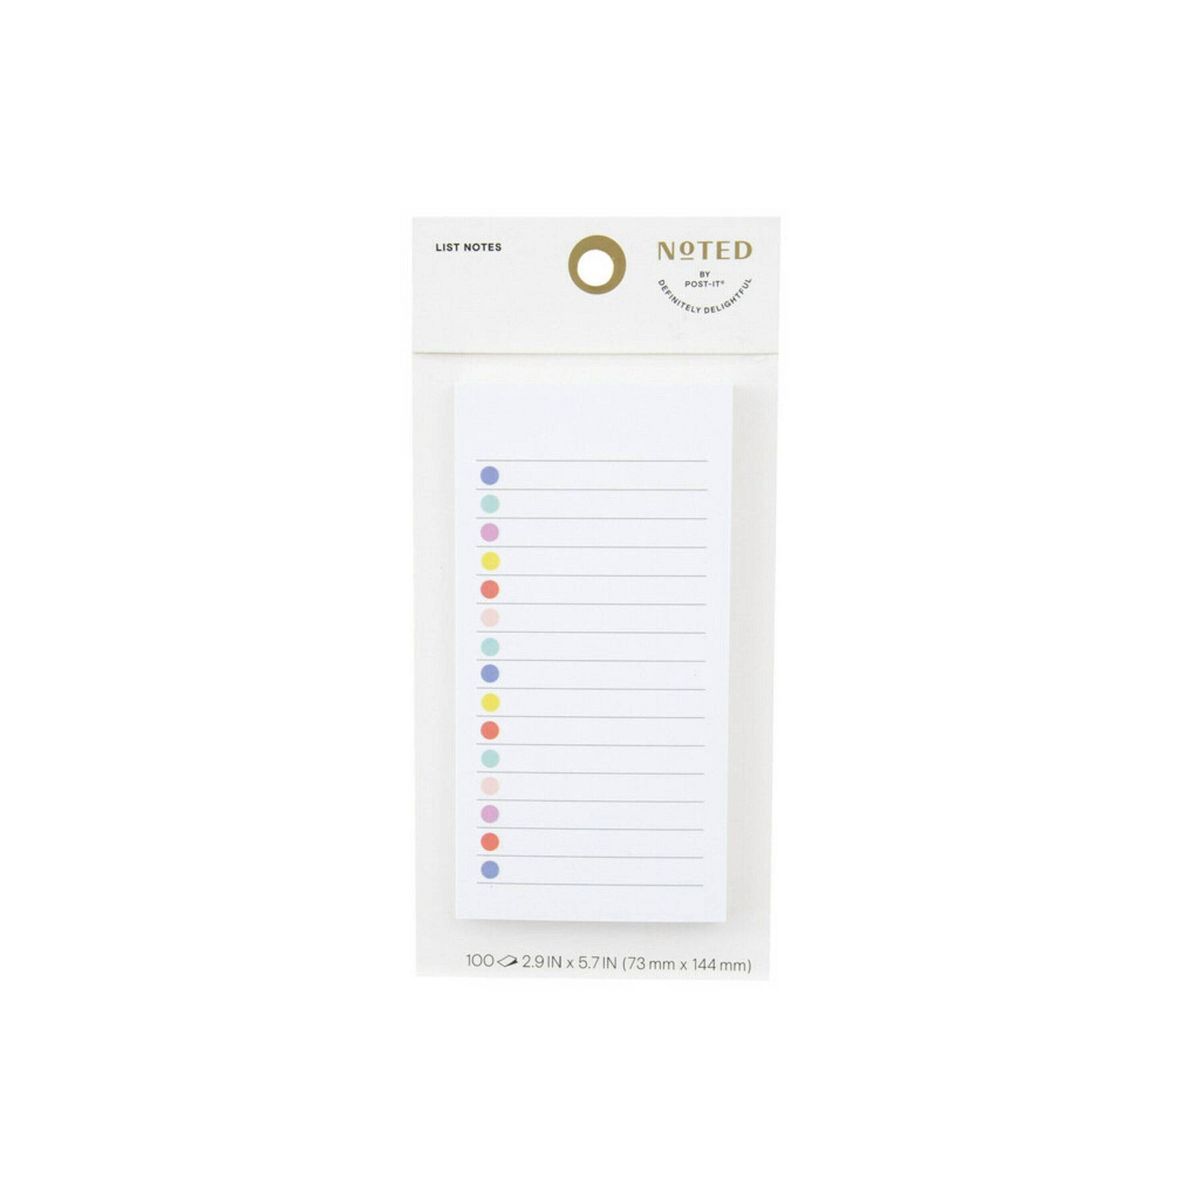 Post-it Noted List Notes Check-Off Bubbles | Target